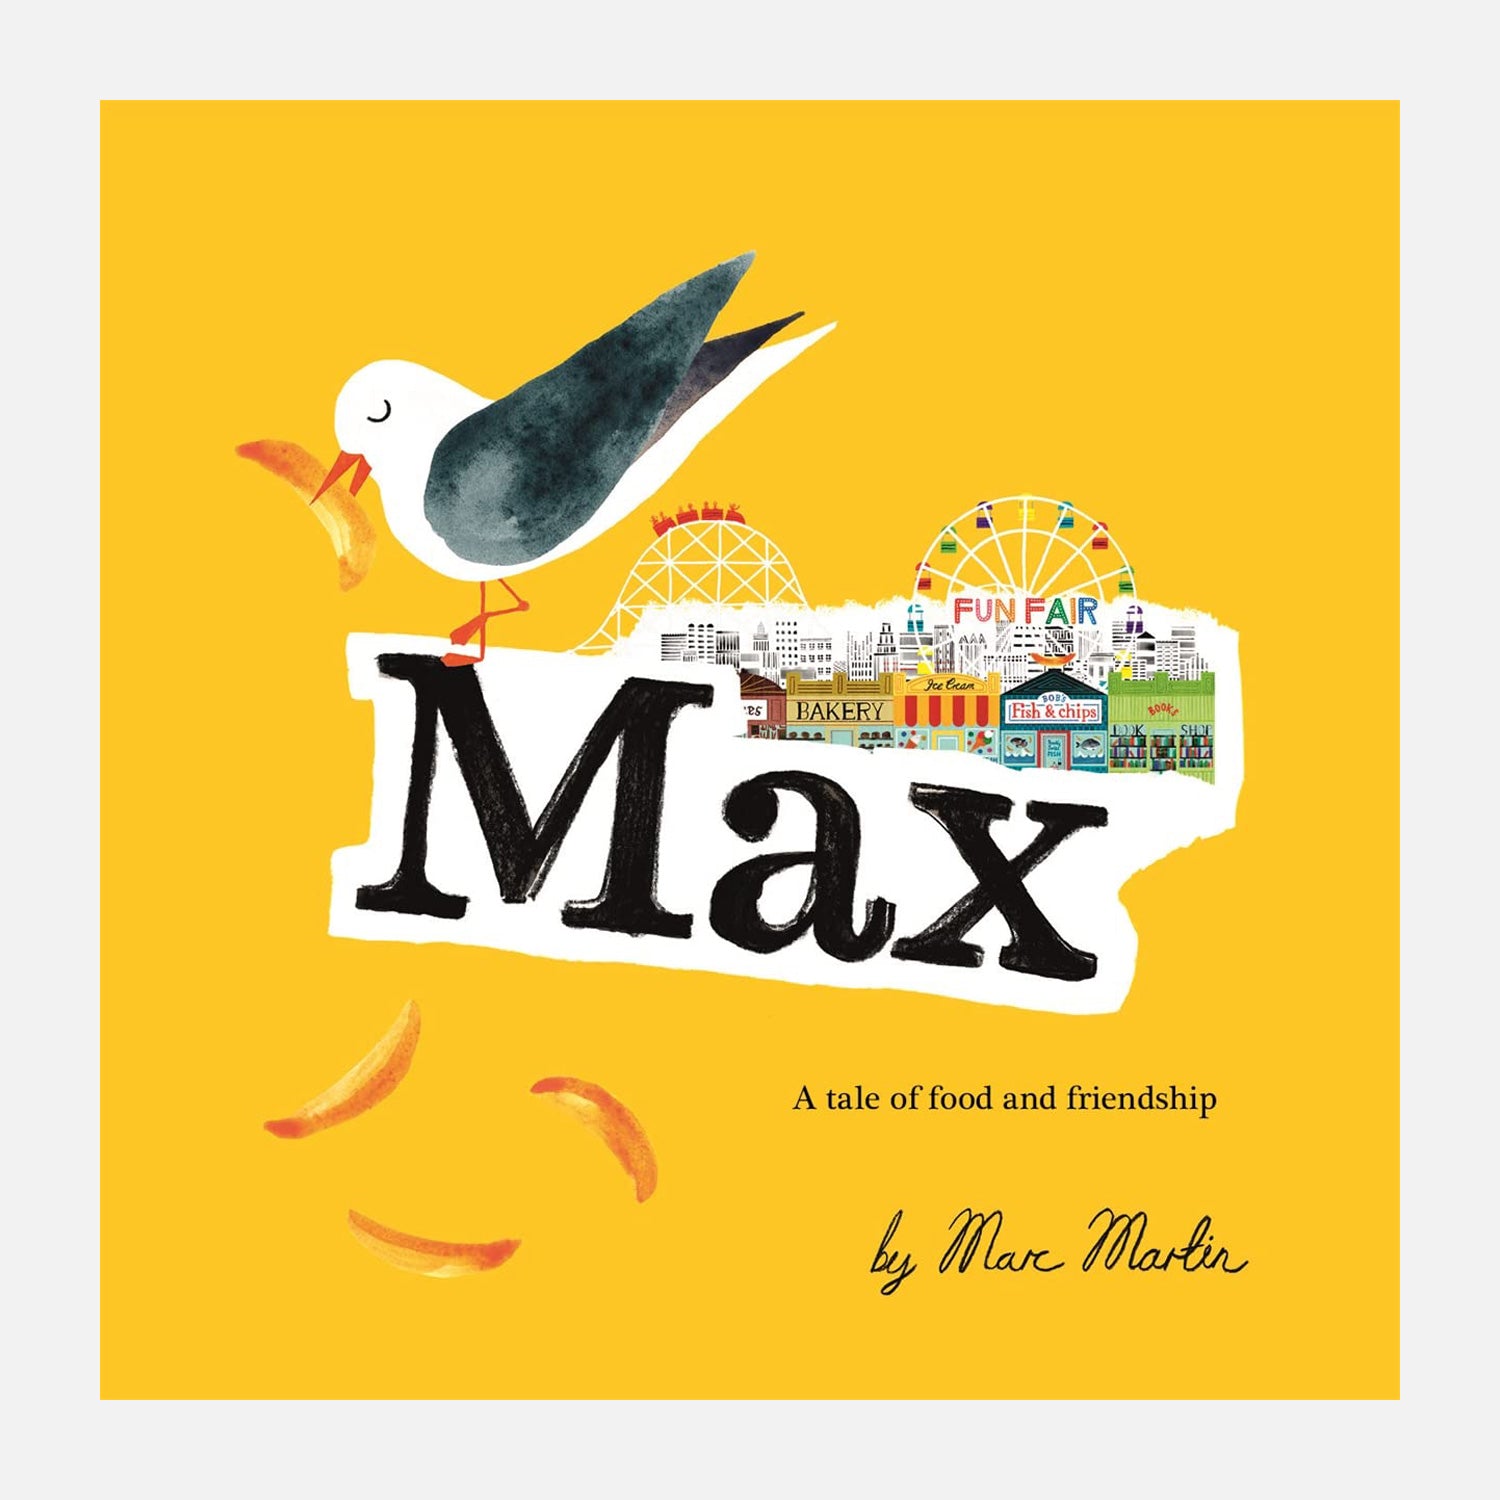 Max, a tale of food and friendship. cover shows a seagull eating a chip